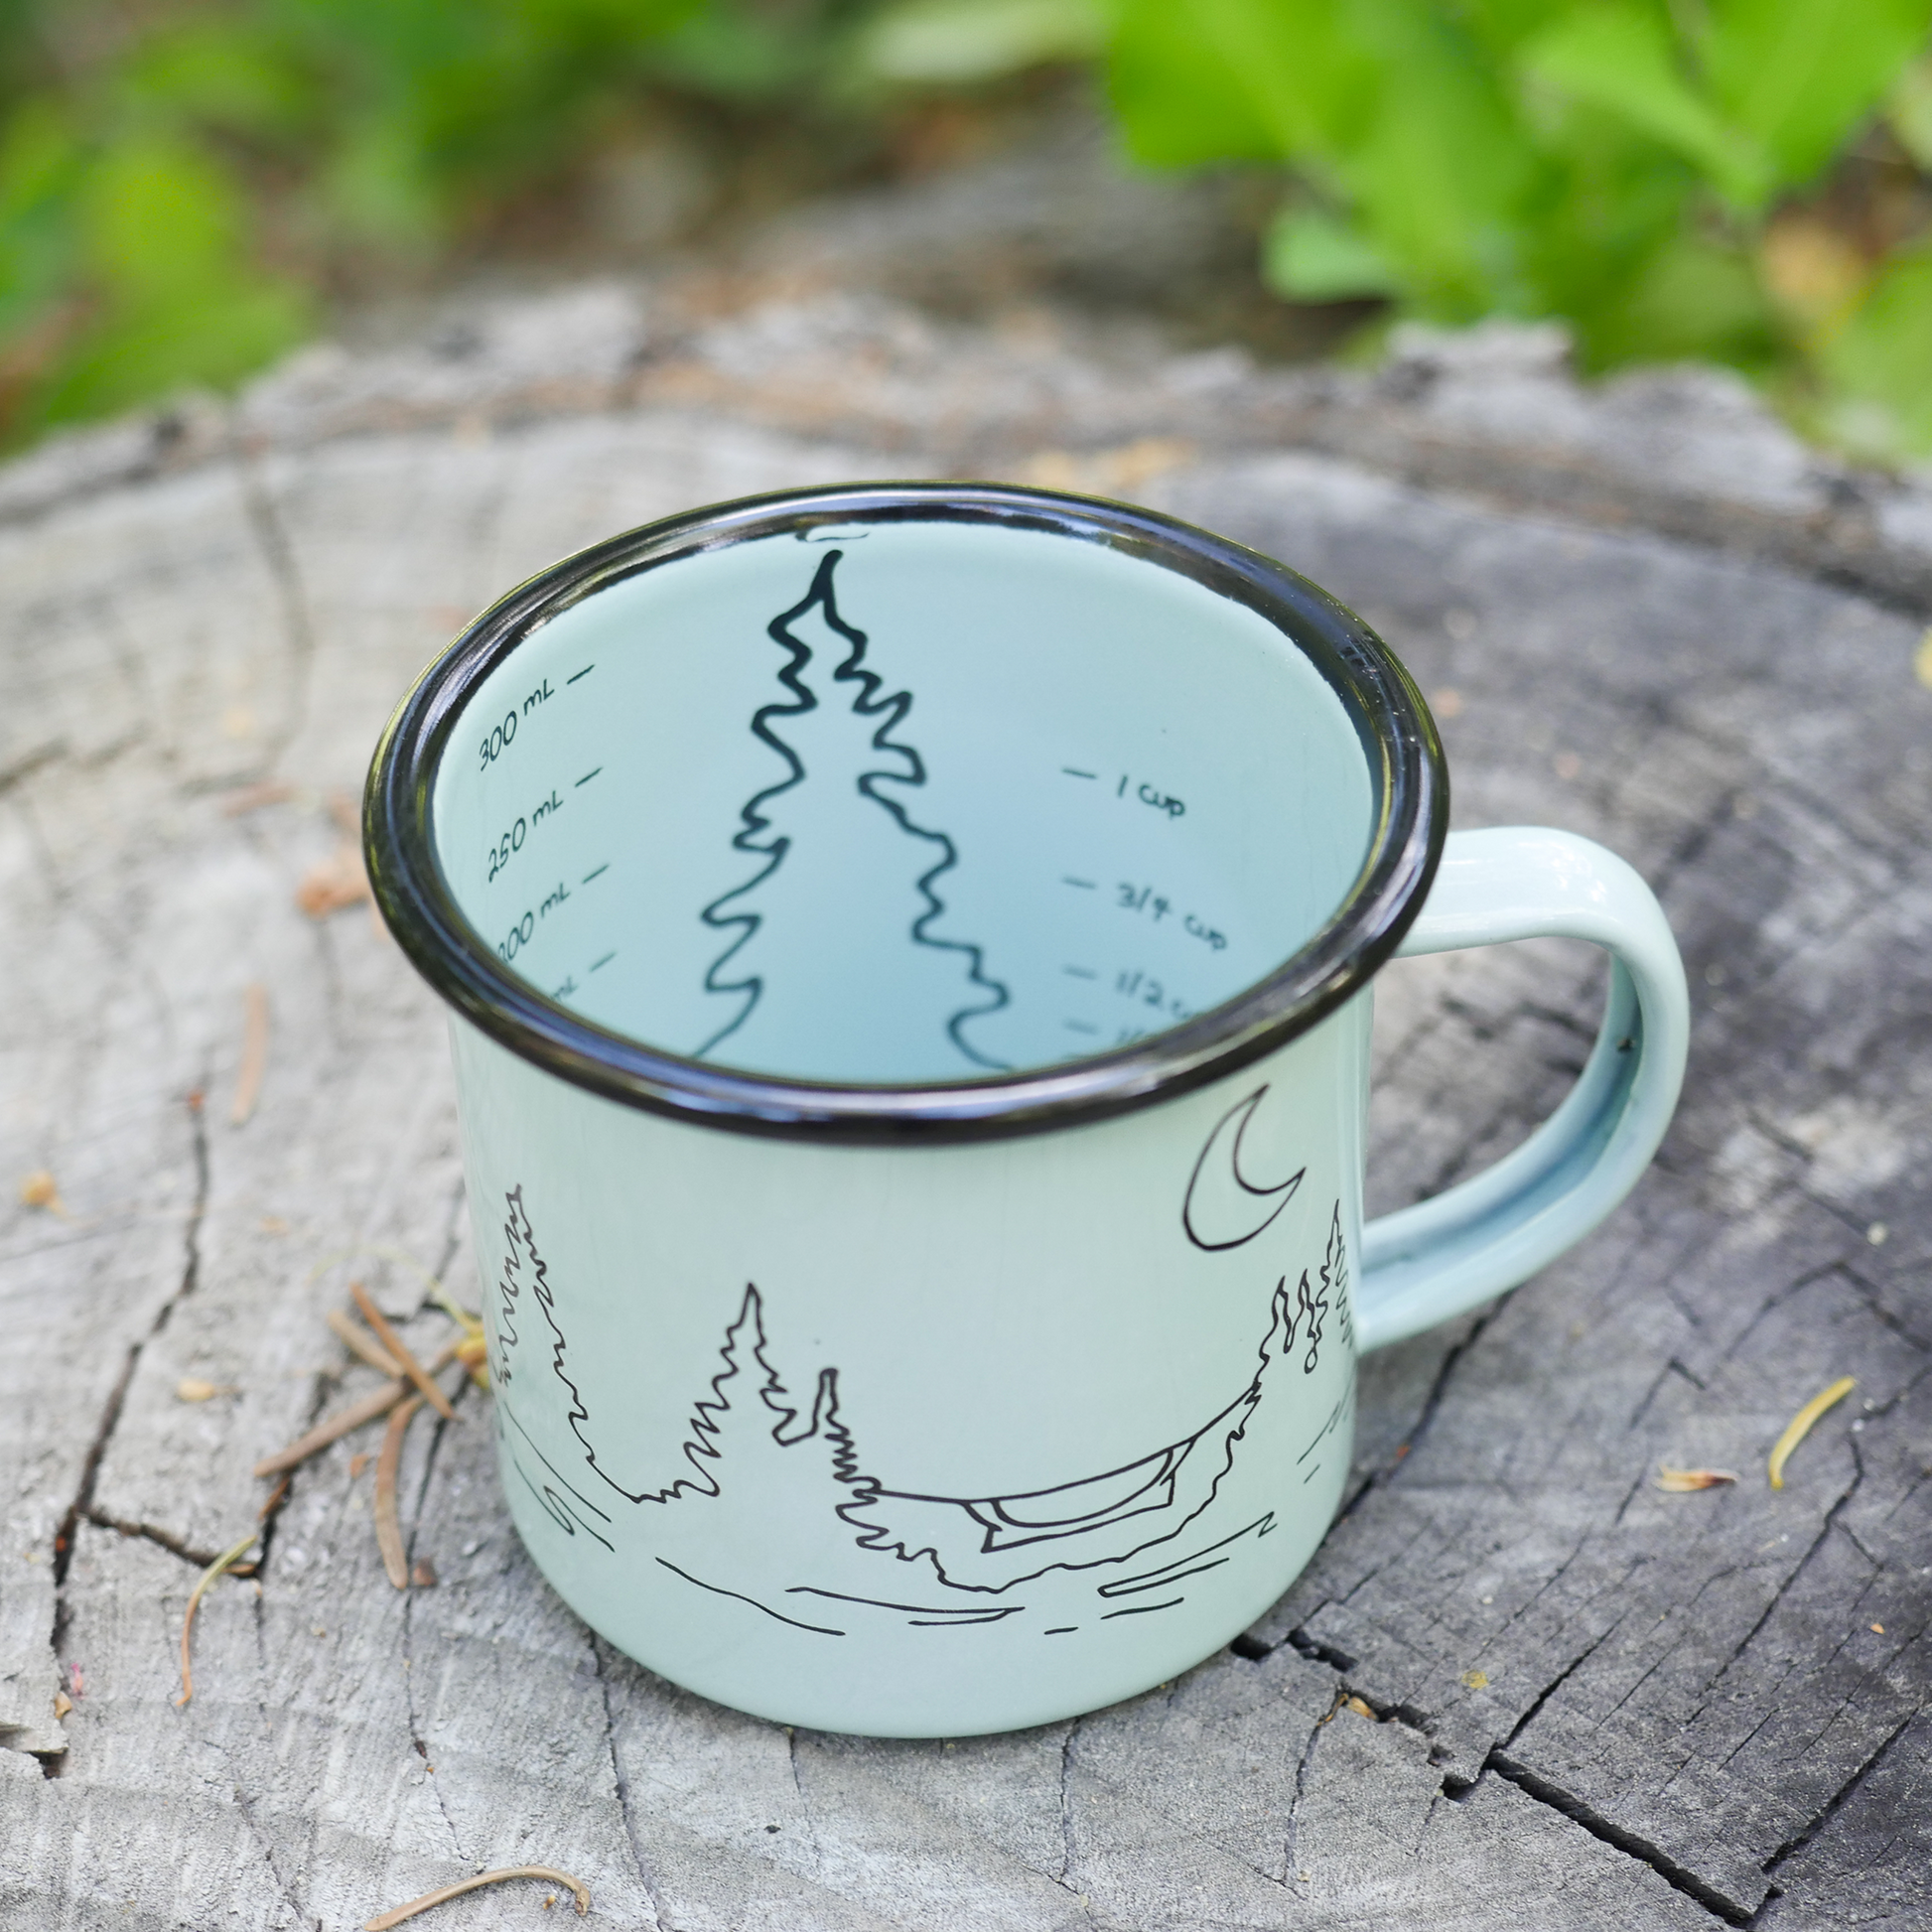 Light blue camping mug that doubles as a measuring cup